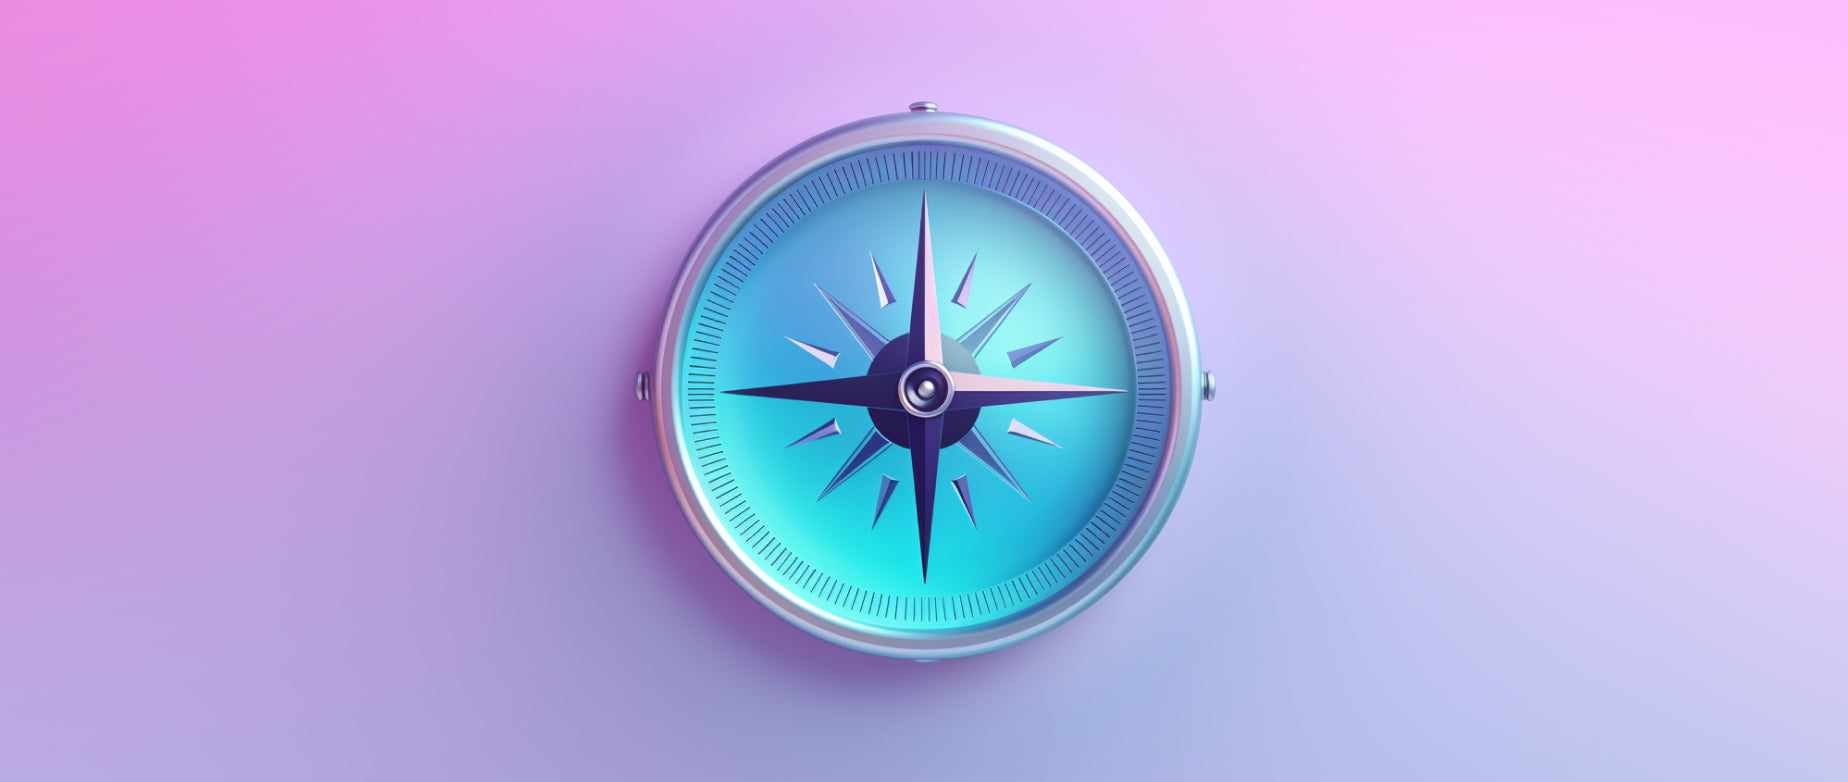 a compass against a pink background: authentic leadership